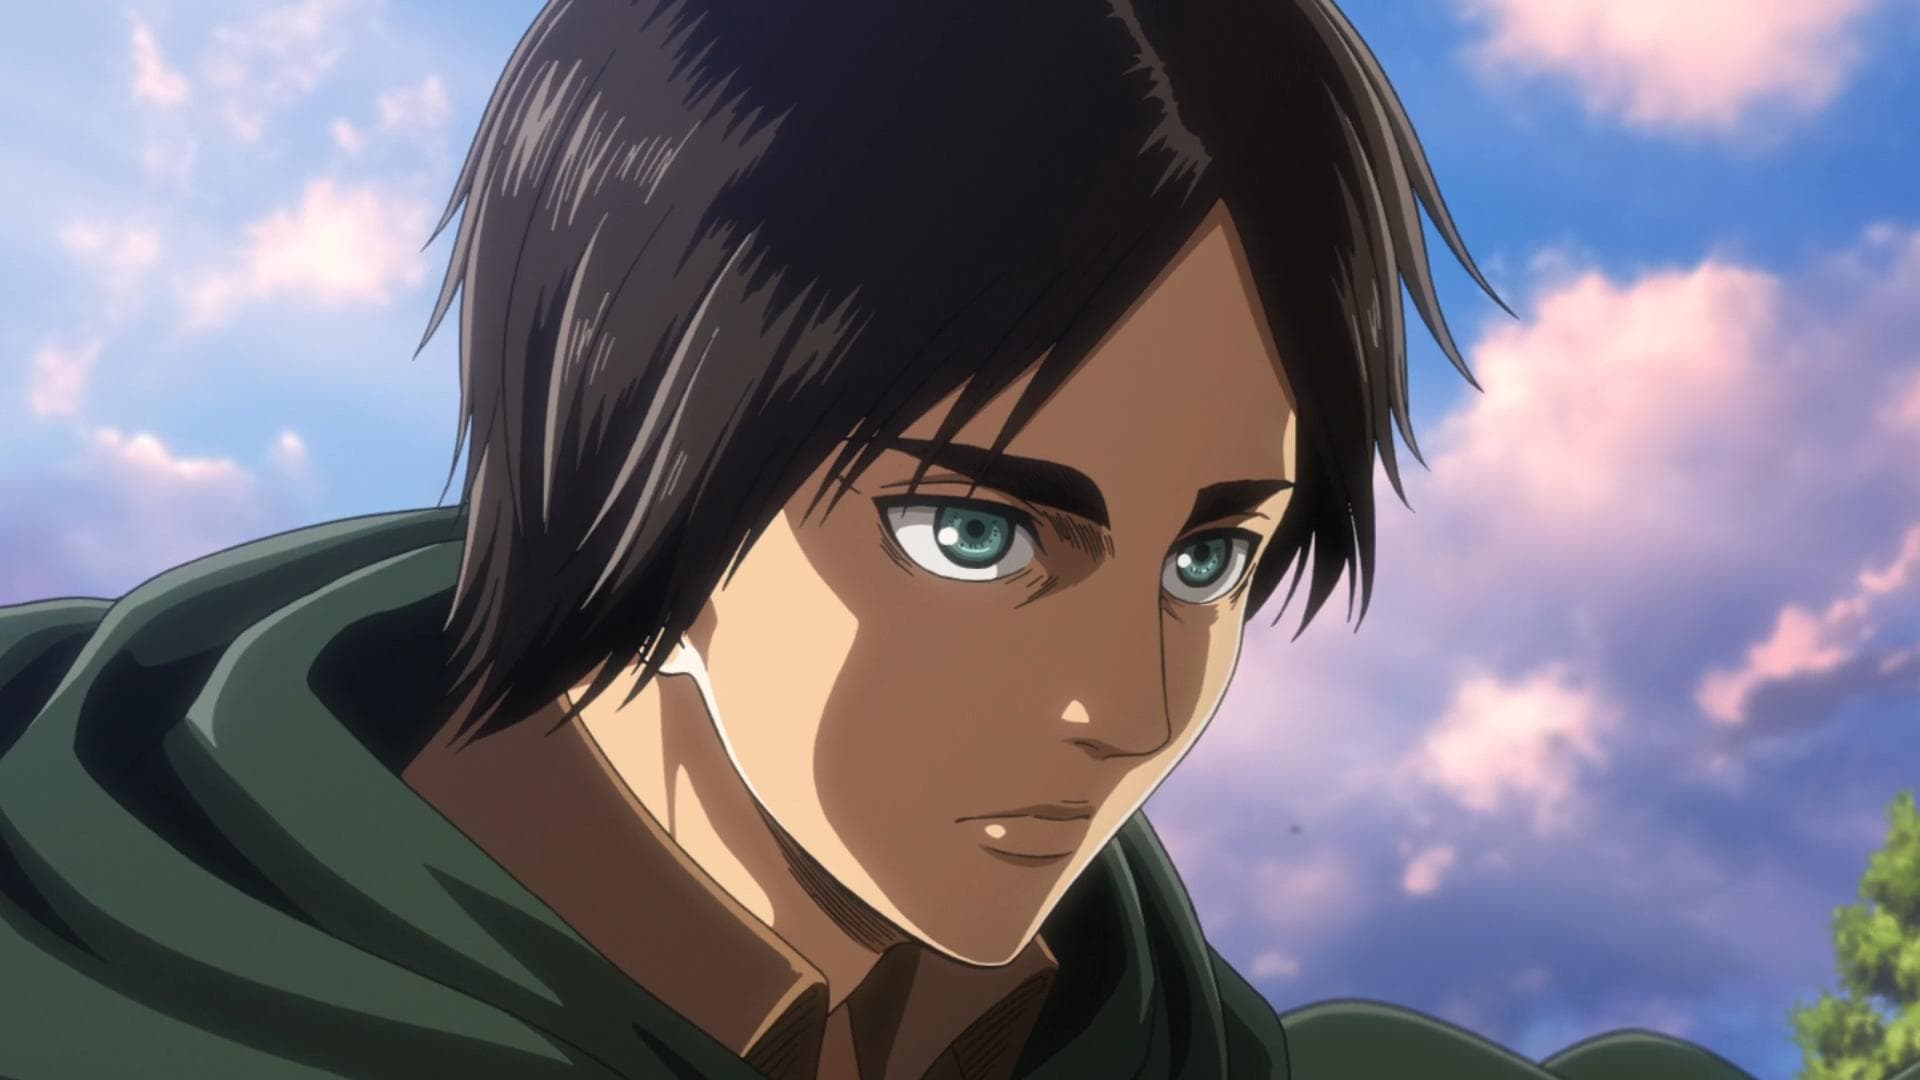 Medium Eren Yeager Season 4 Wallpaper Cave for Rounded Face